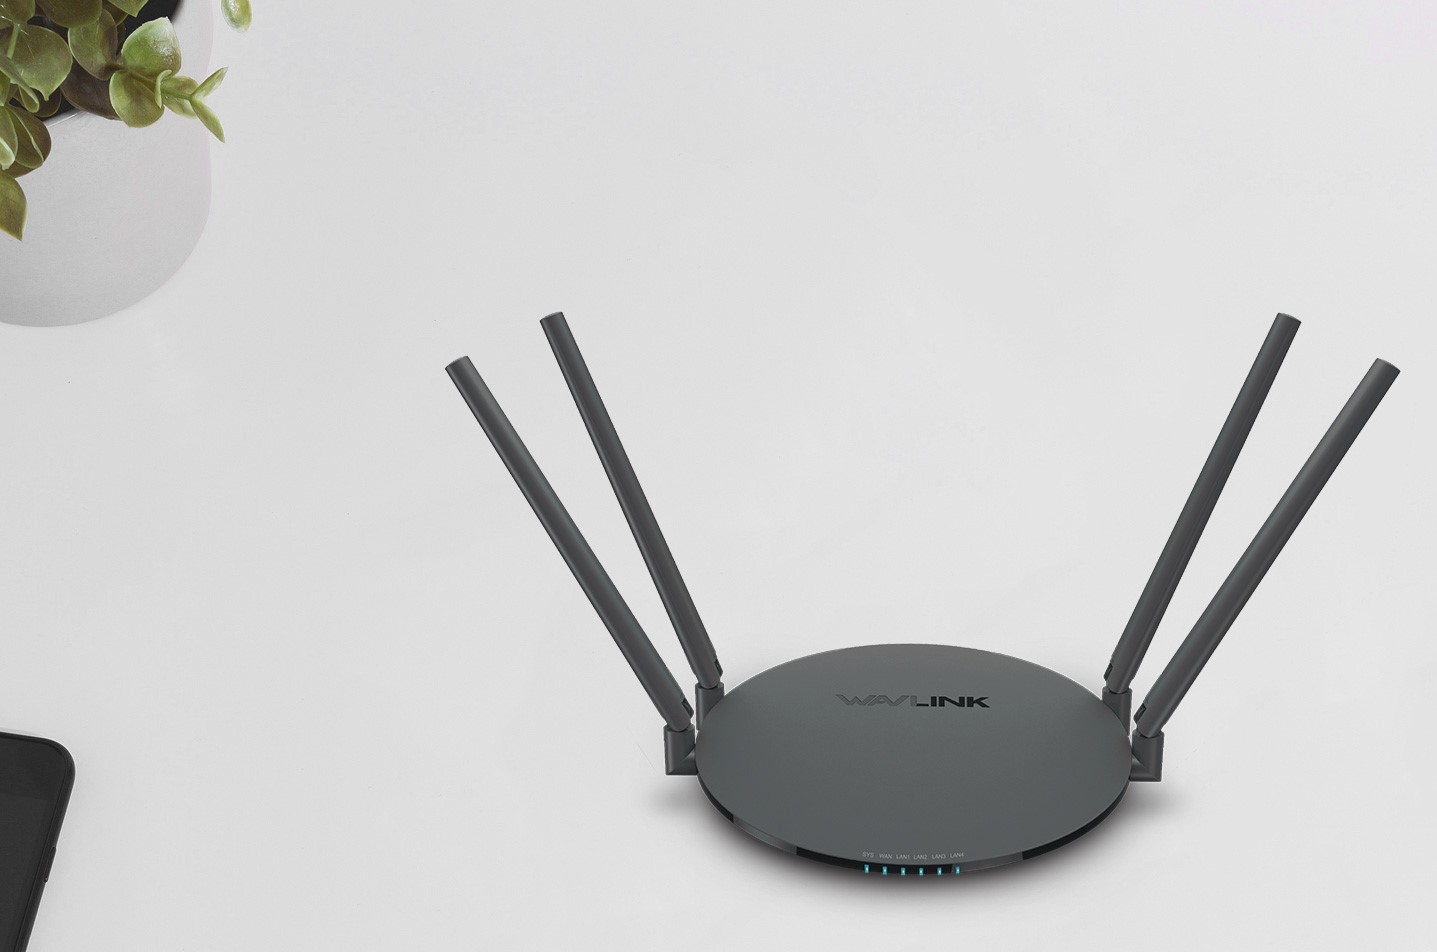 TP-Link WiFi 6 Router AX1800 Smart WiFi Router (Archer AX21) - Dual Band  Gigabit Router, Works with Alexa - A Certified for Humans Device 